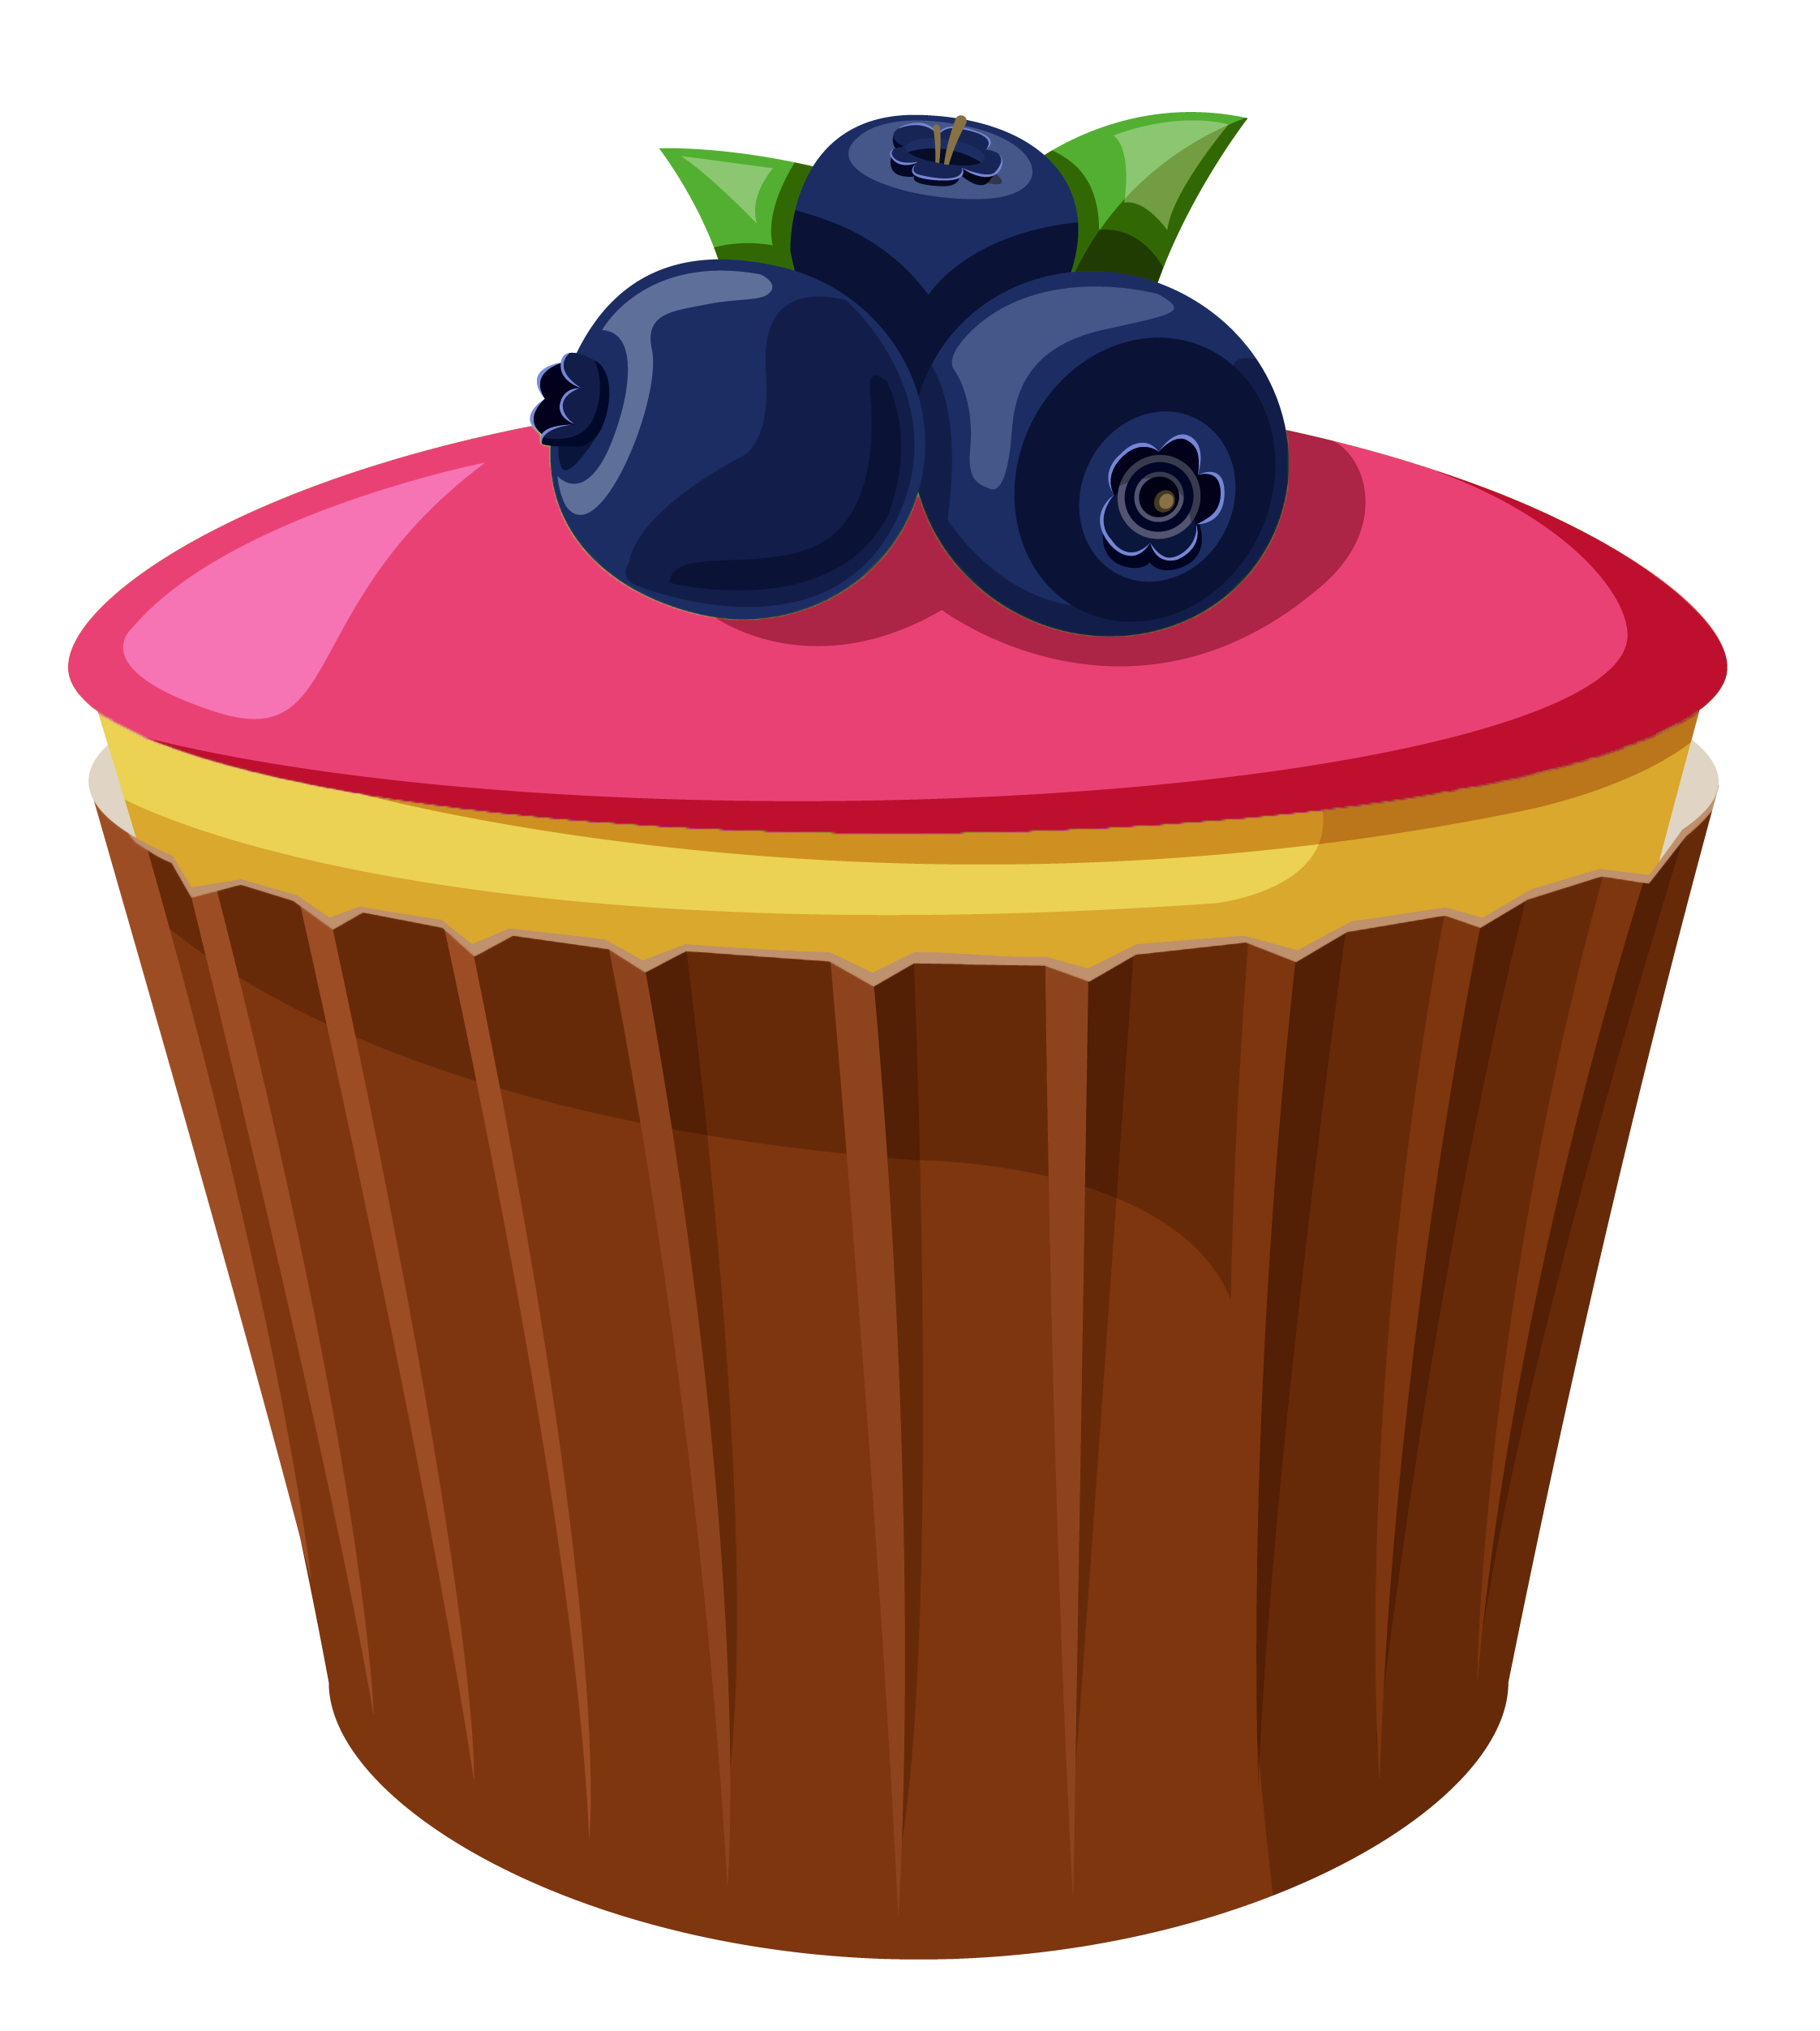 muffins clipart small cupcake